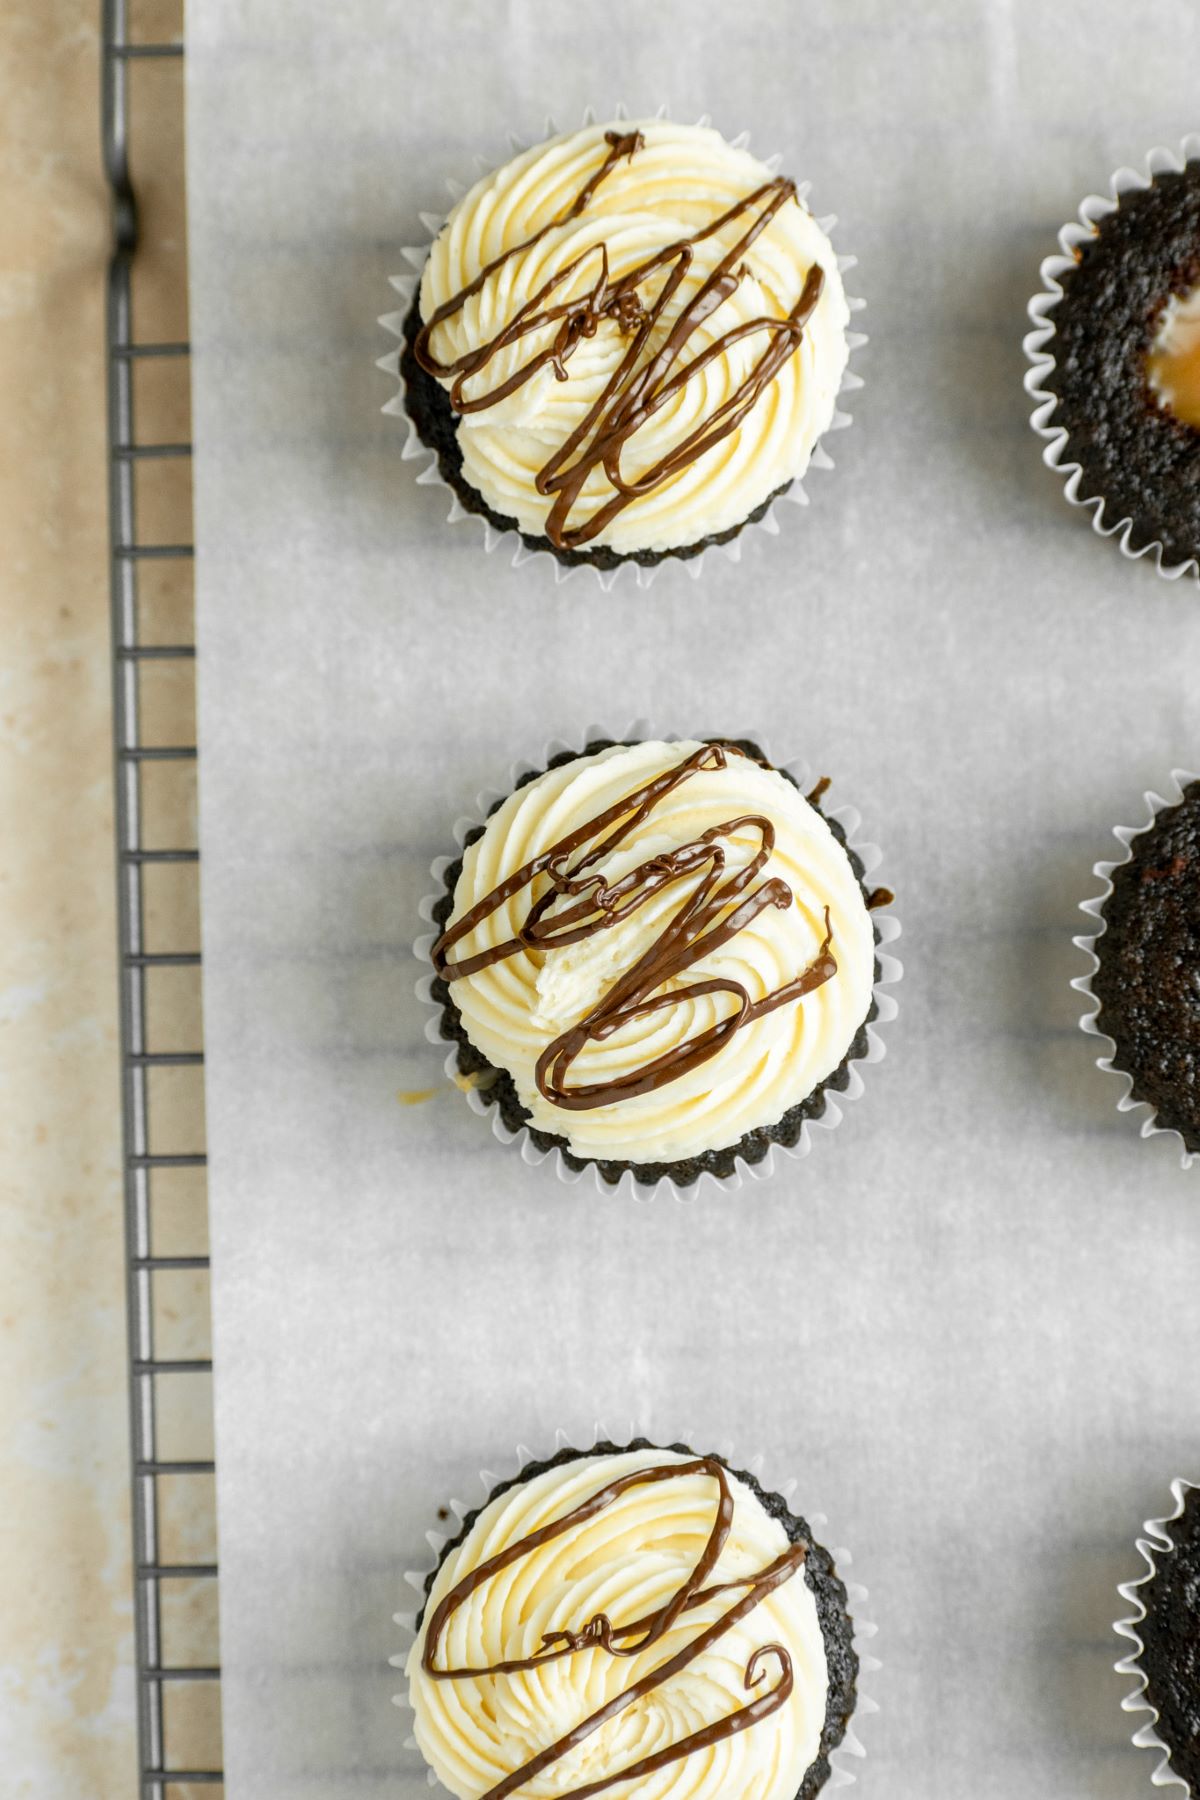 Caramel frosting and a chocolate drizzle on top of cupcakes.